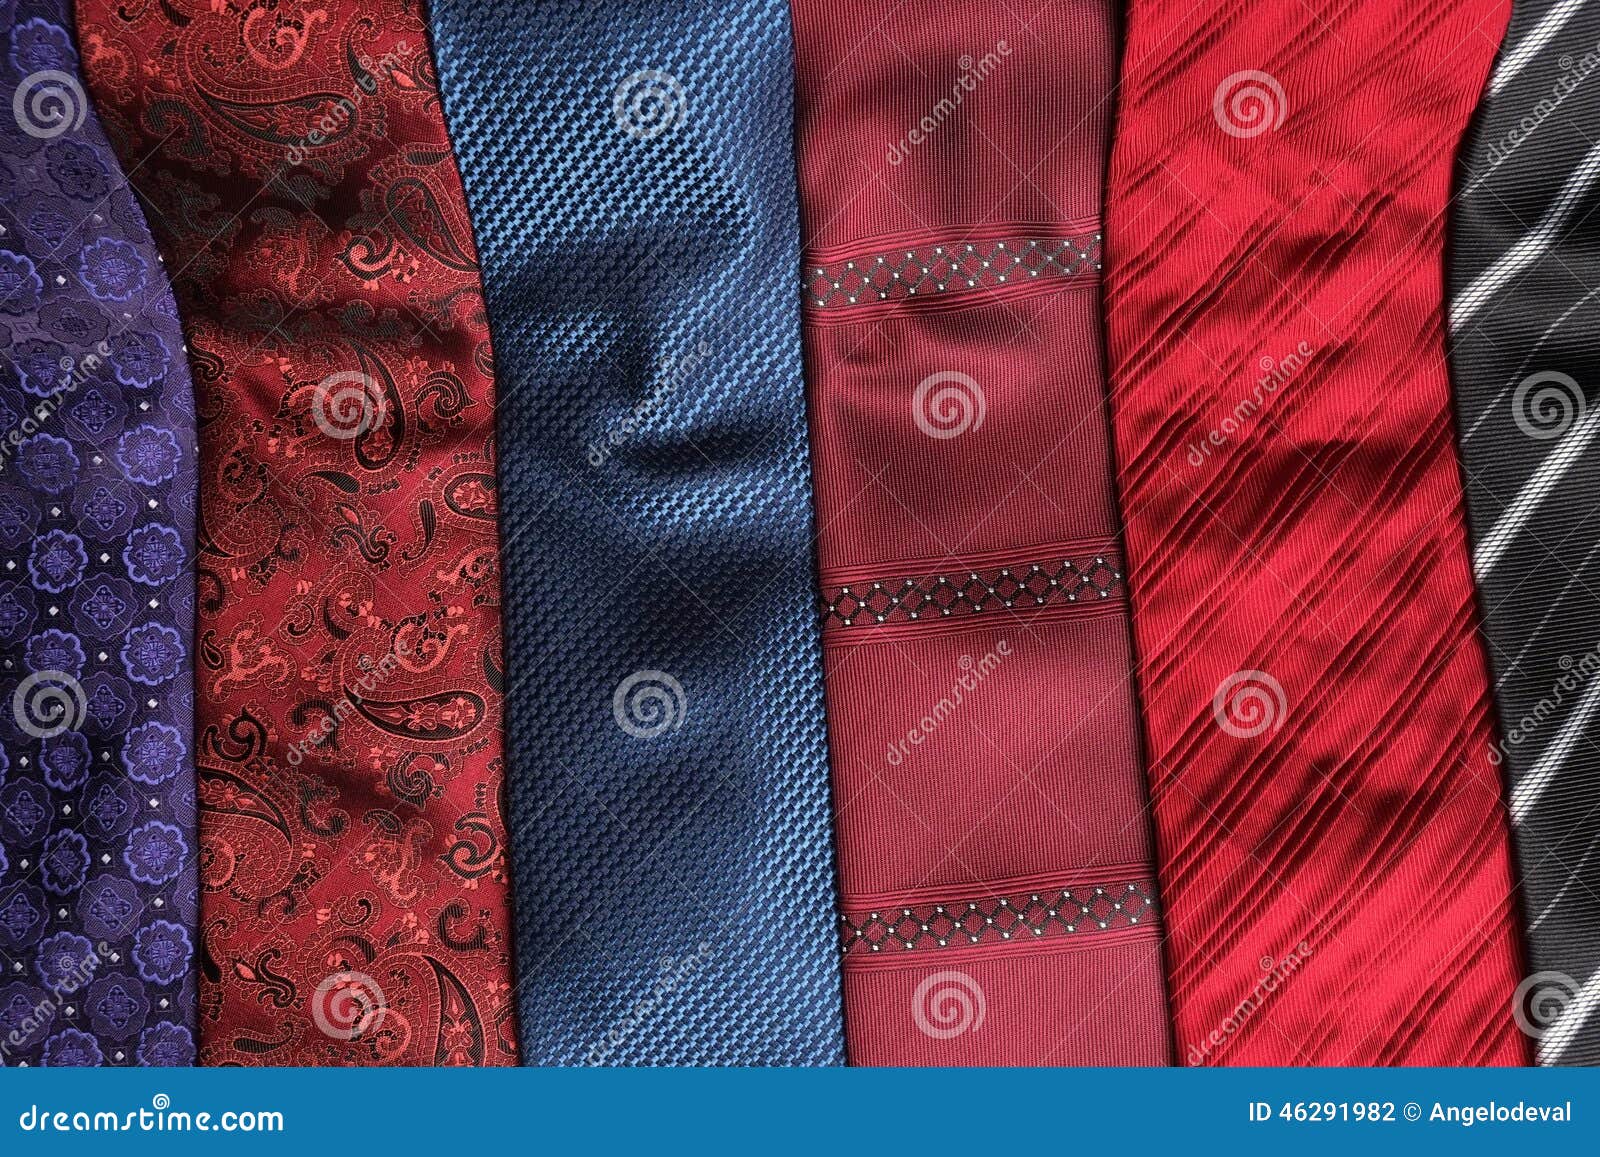 Unrolled Ties Extended on a Table Stock Photo - Image of novels ...